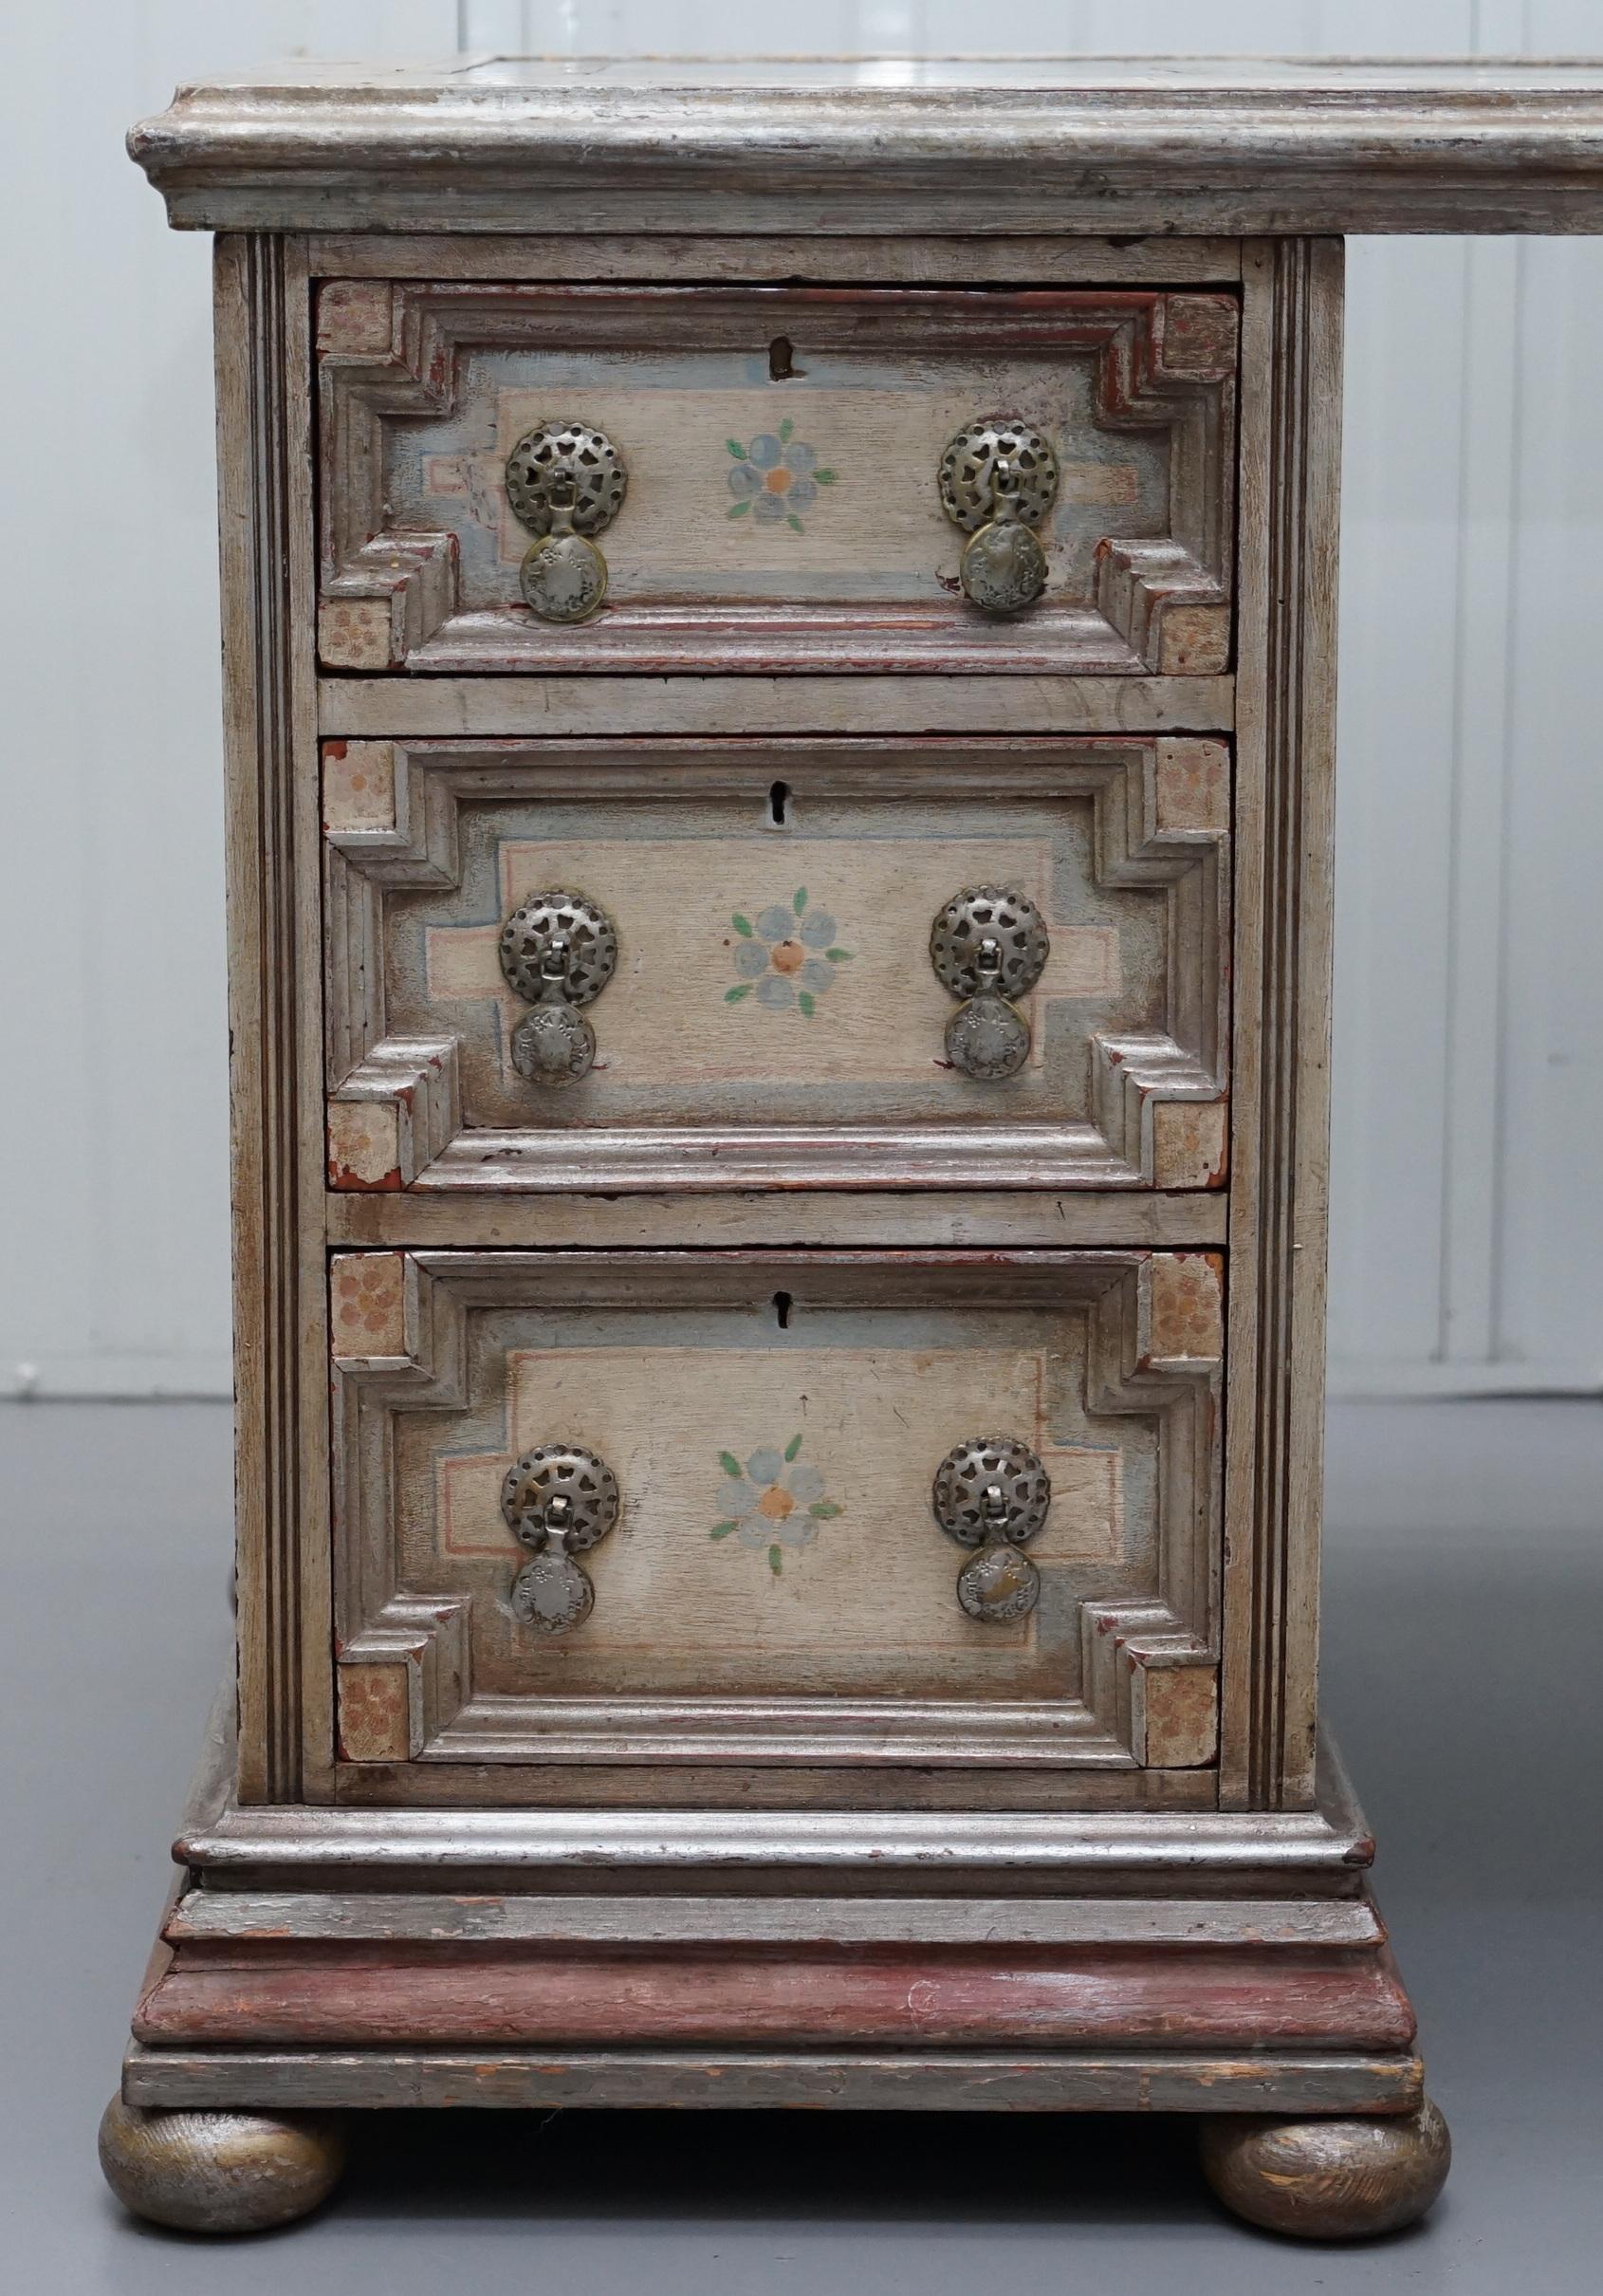 20th Century Rare Hand Painted Pedestal Desk by the Artist Ambrose Thomas Marquis d'Oisy For Sale